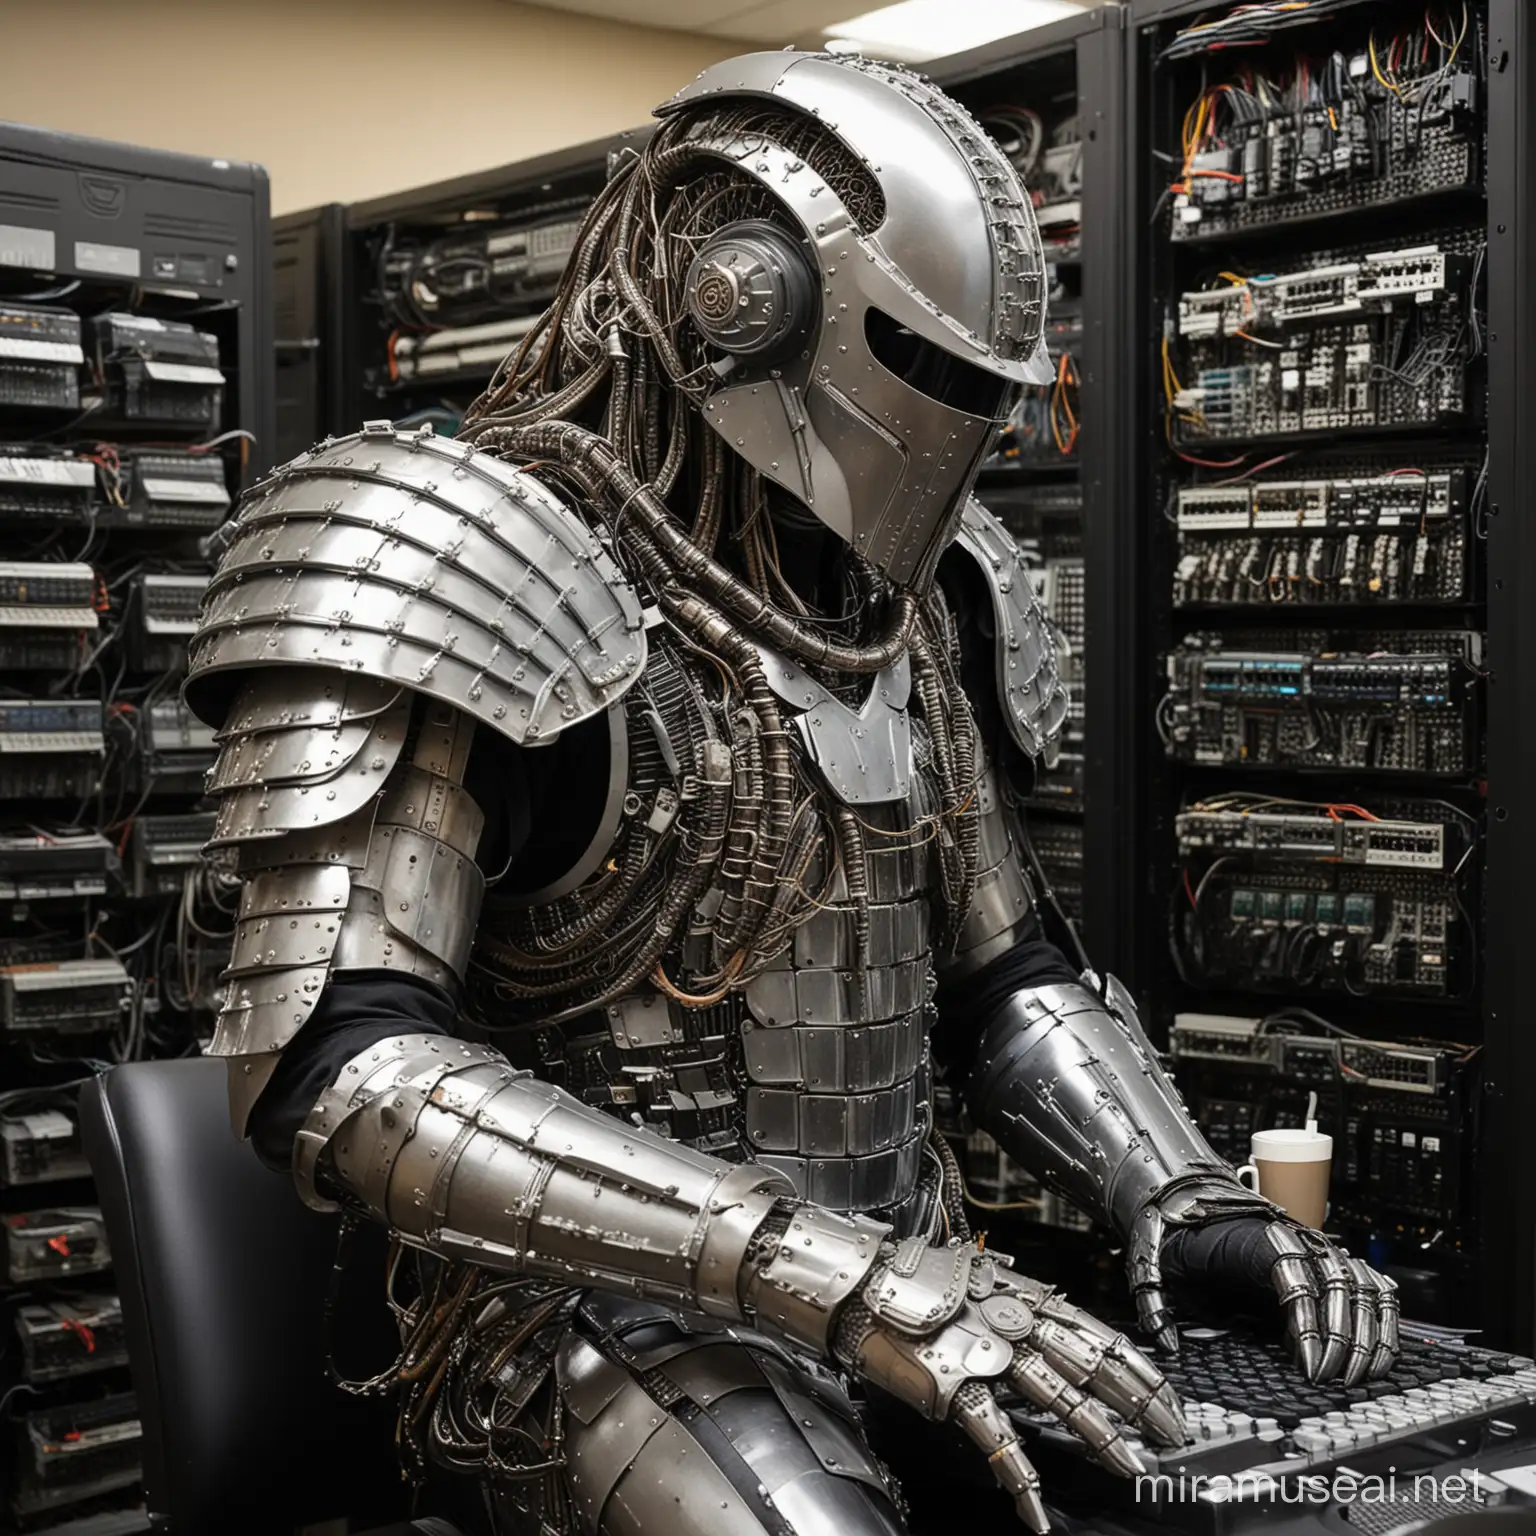 Server Room Side: A tired IT worker, wearing a shining suit of armor made entirely out of old computer parts (like keyboards for shoulder pads, a fan for a helmet plume) sits slumped over a glowing server rack, holding a steaming mug of coffee. Wires snake out from the server rack like tentacles from a monster.